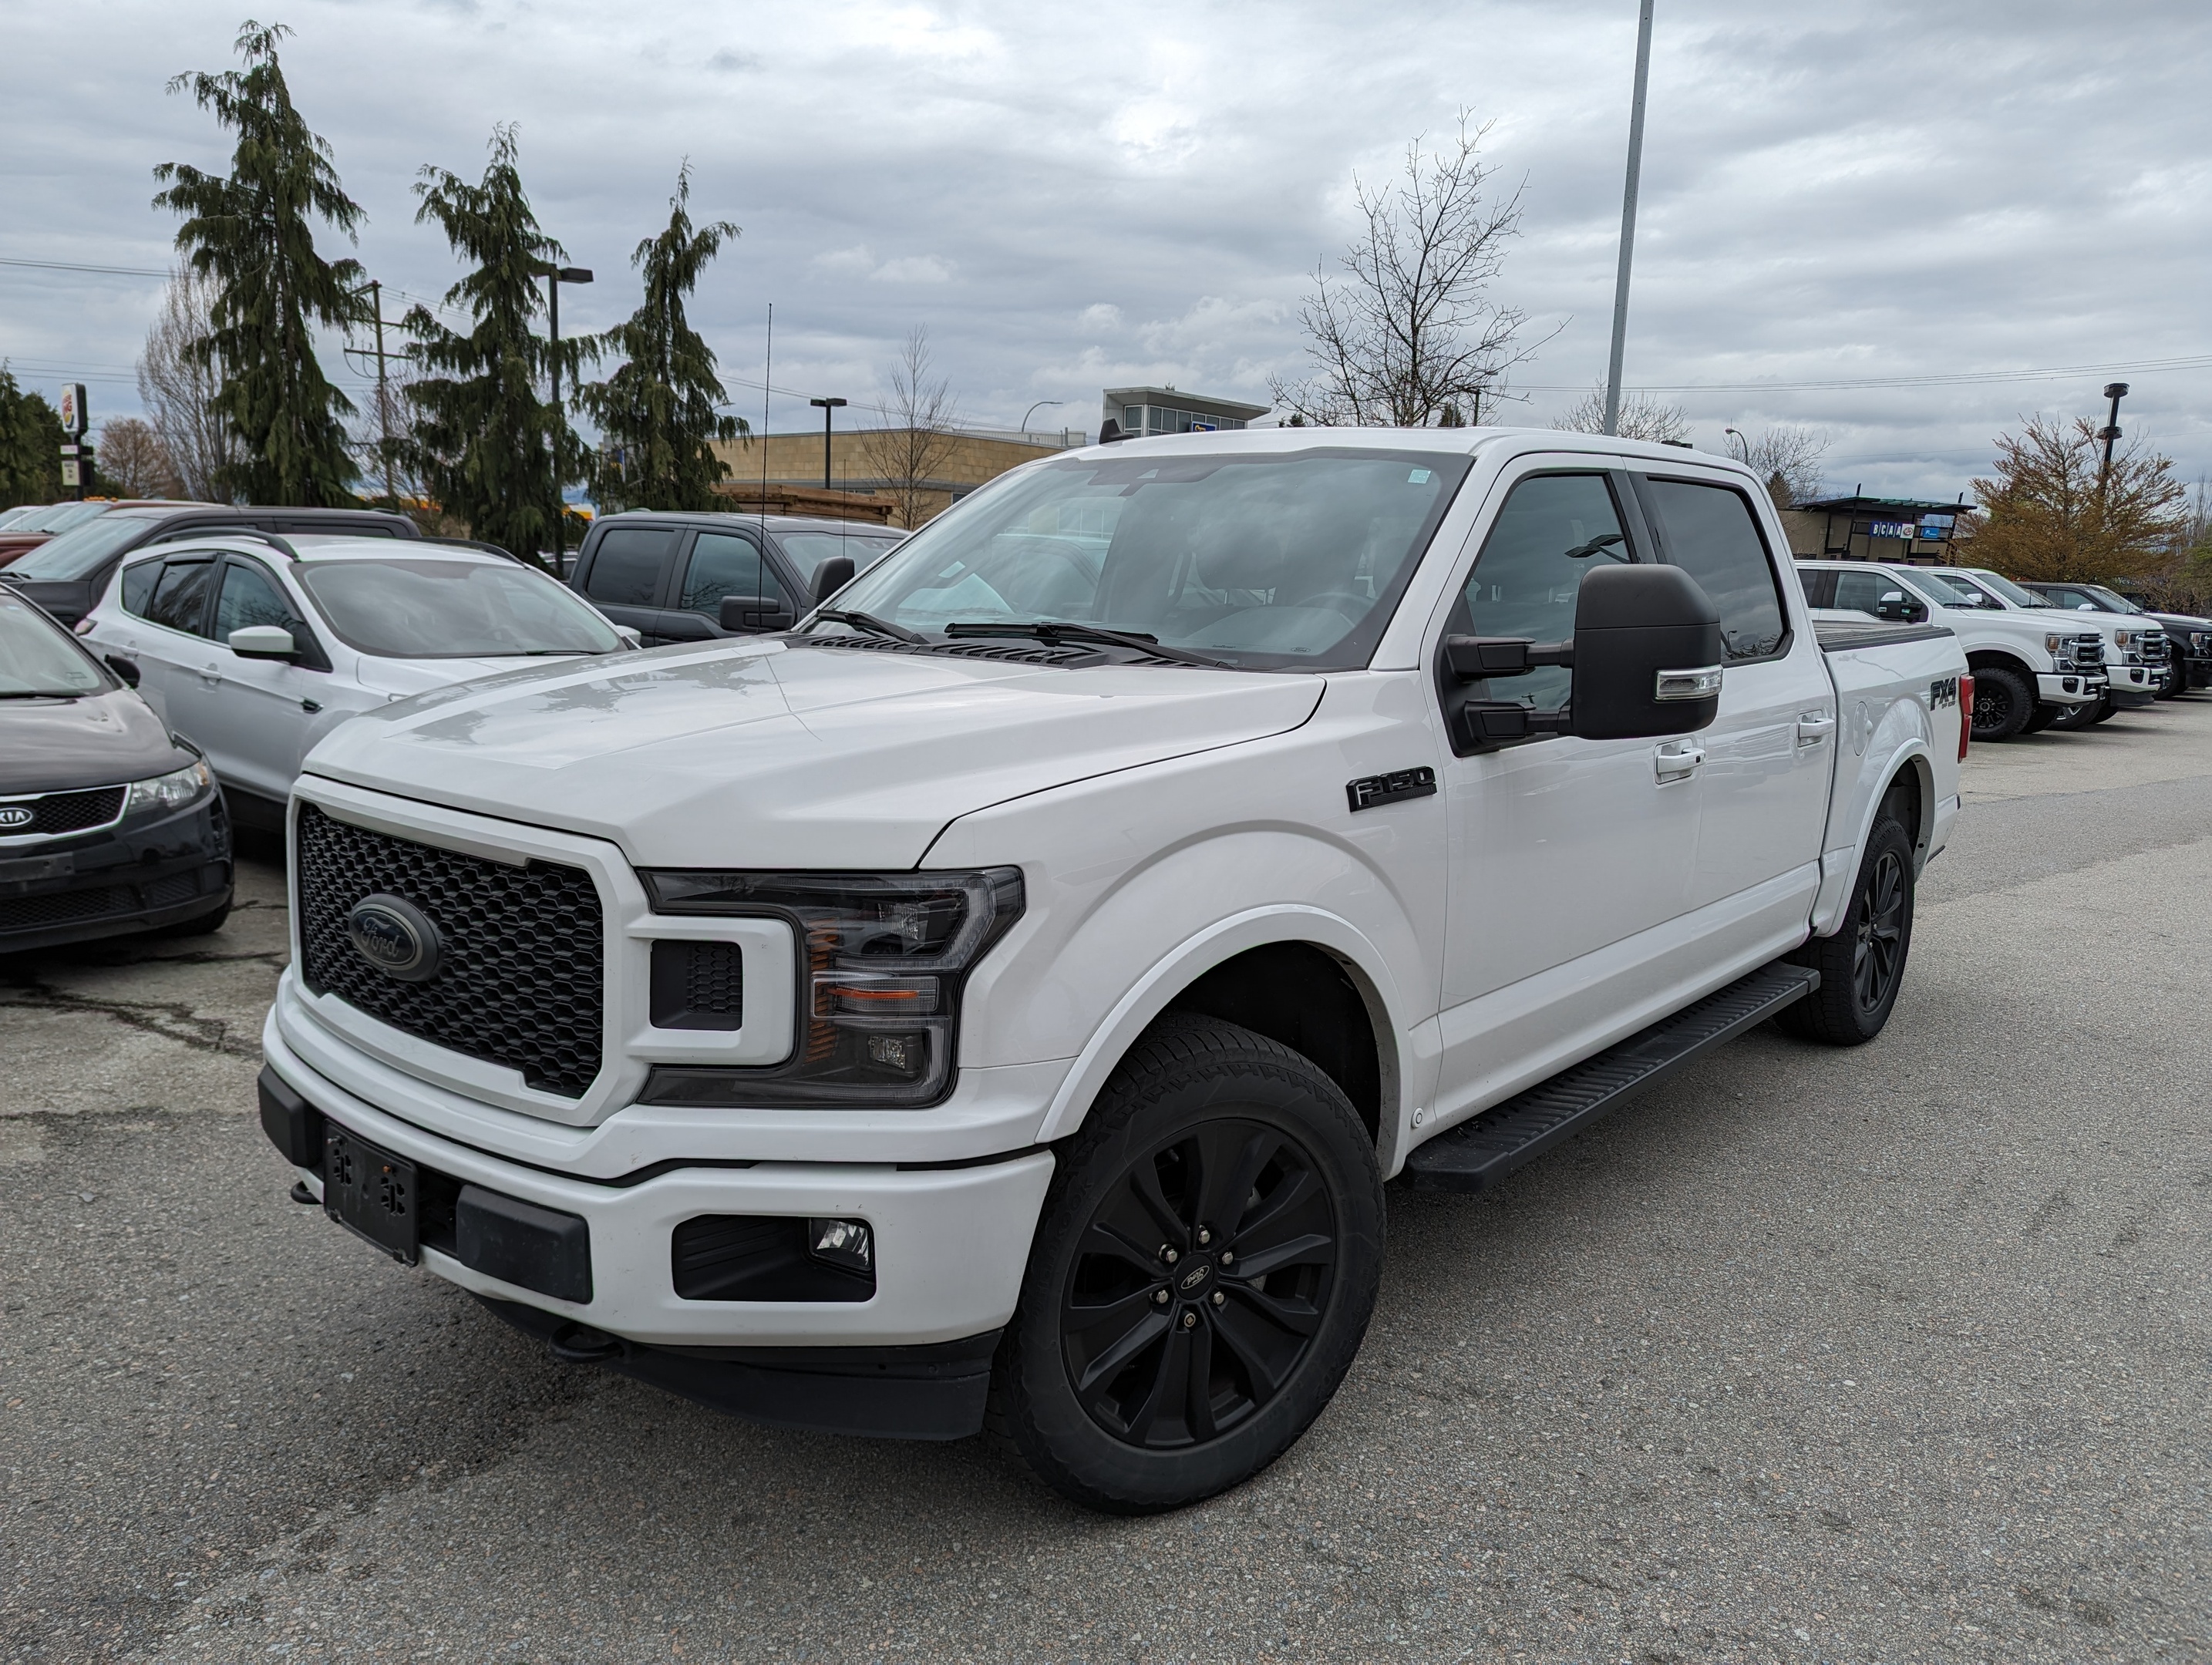 2020 Ford F-150 Sport - Black Appearance, Max Trailer Tow Pkgs